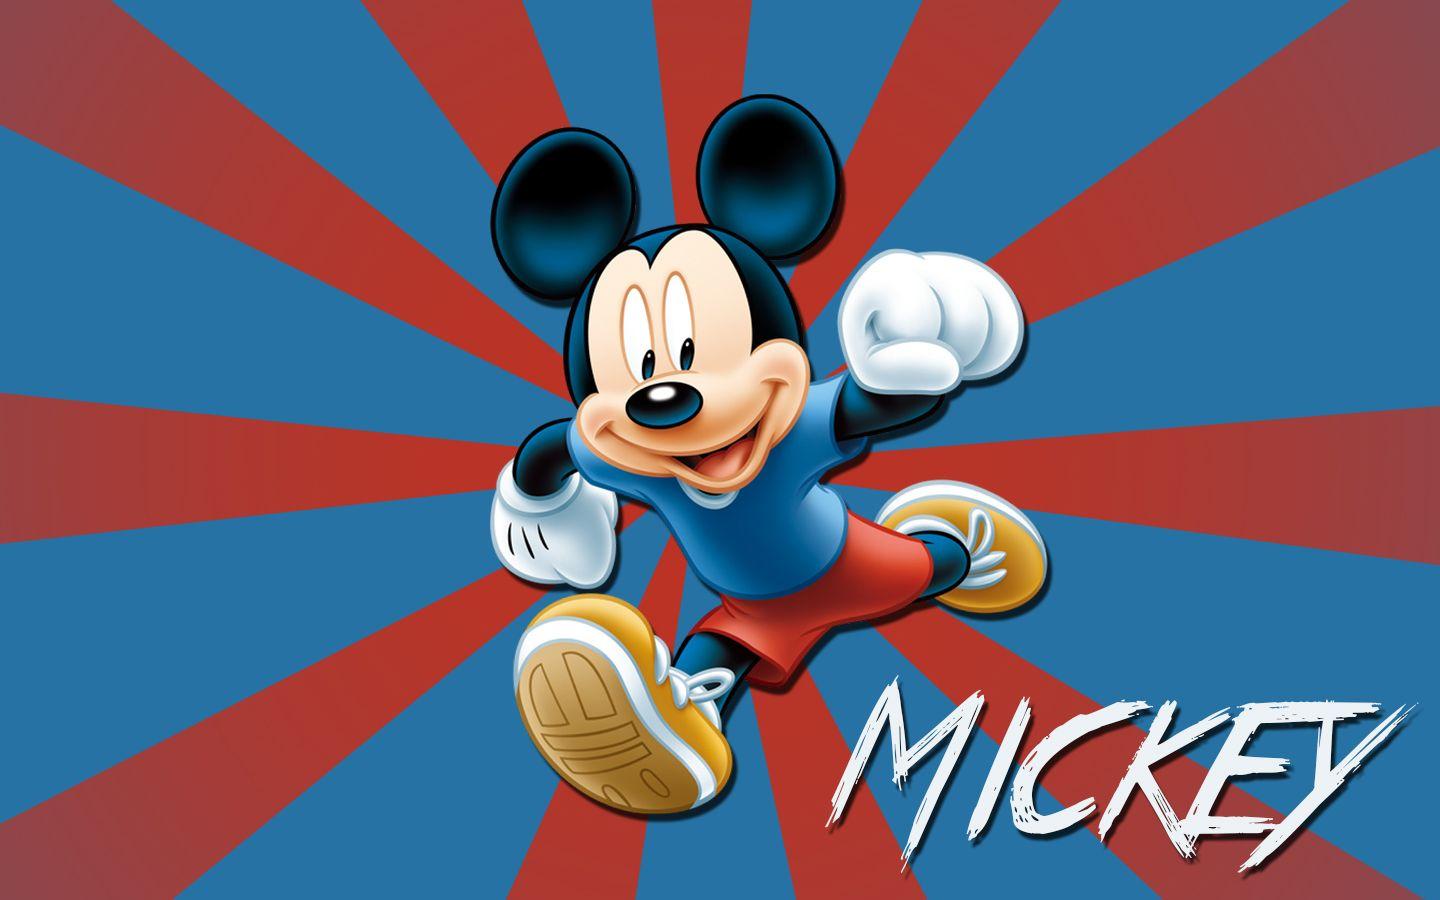 Mickey Mouse Hd Wallpapers Wallpaper Cave